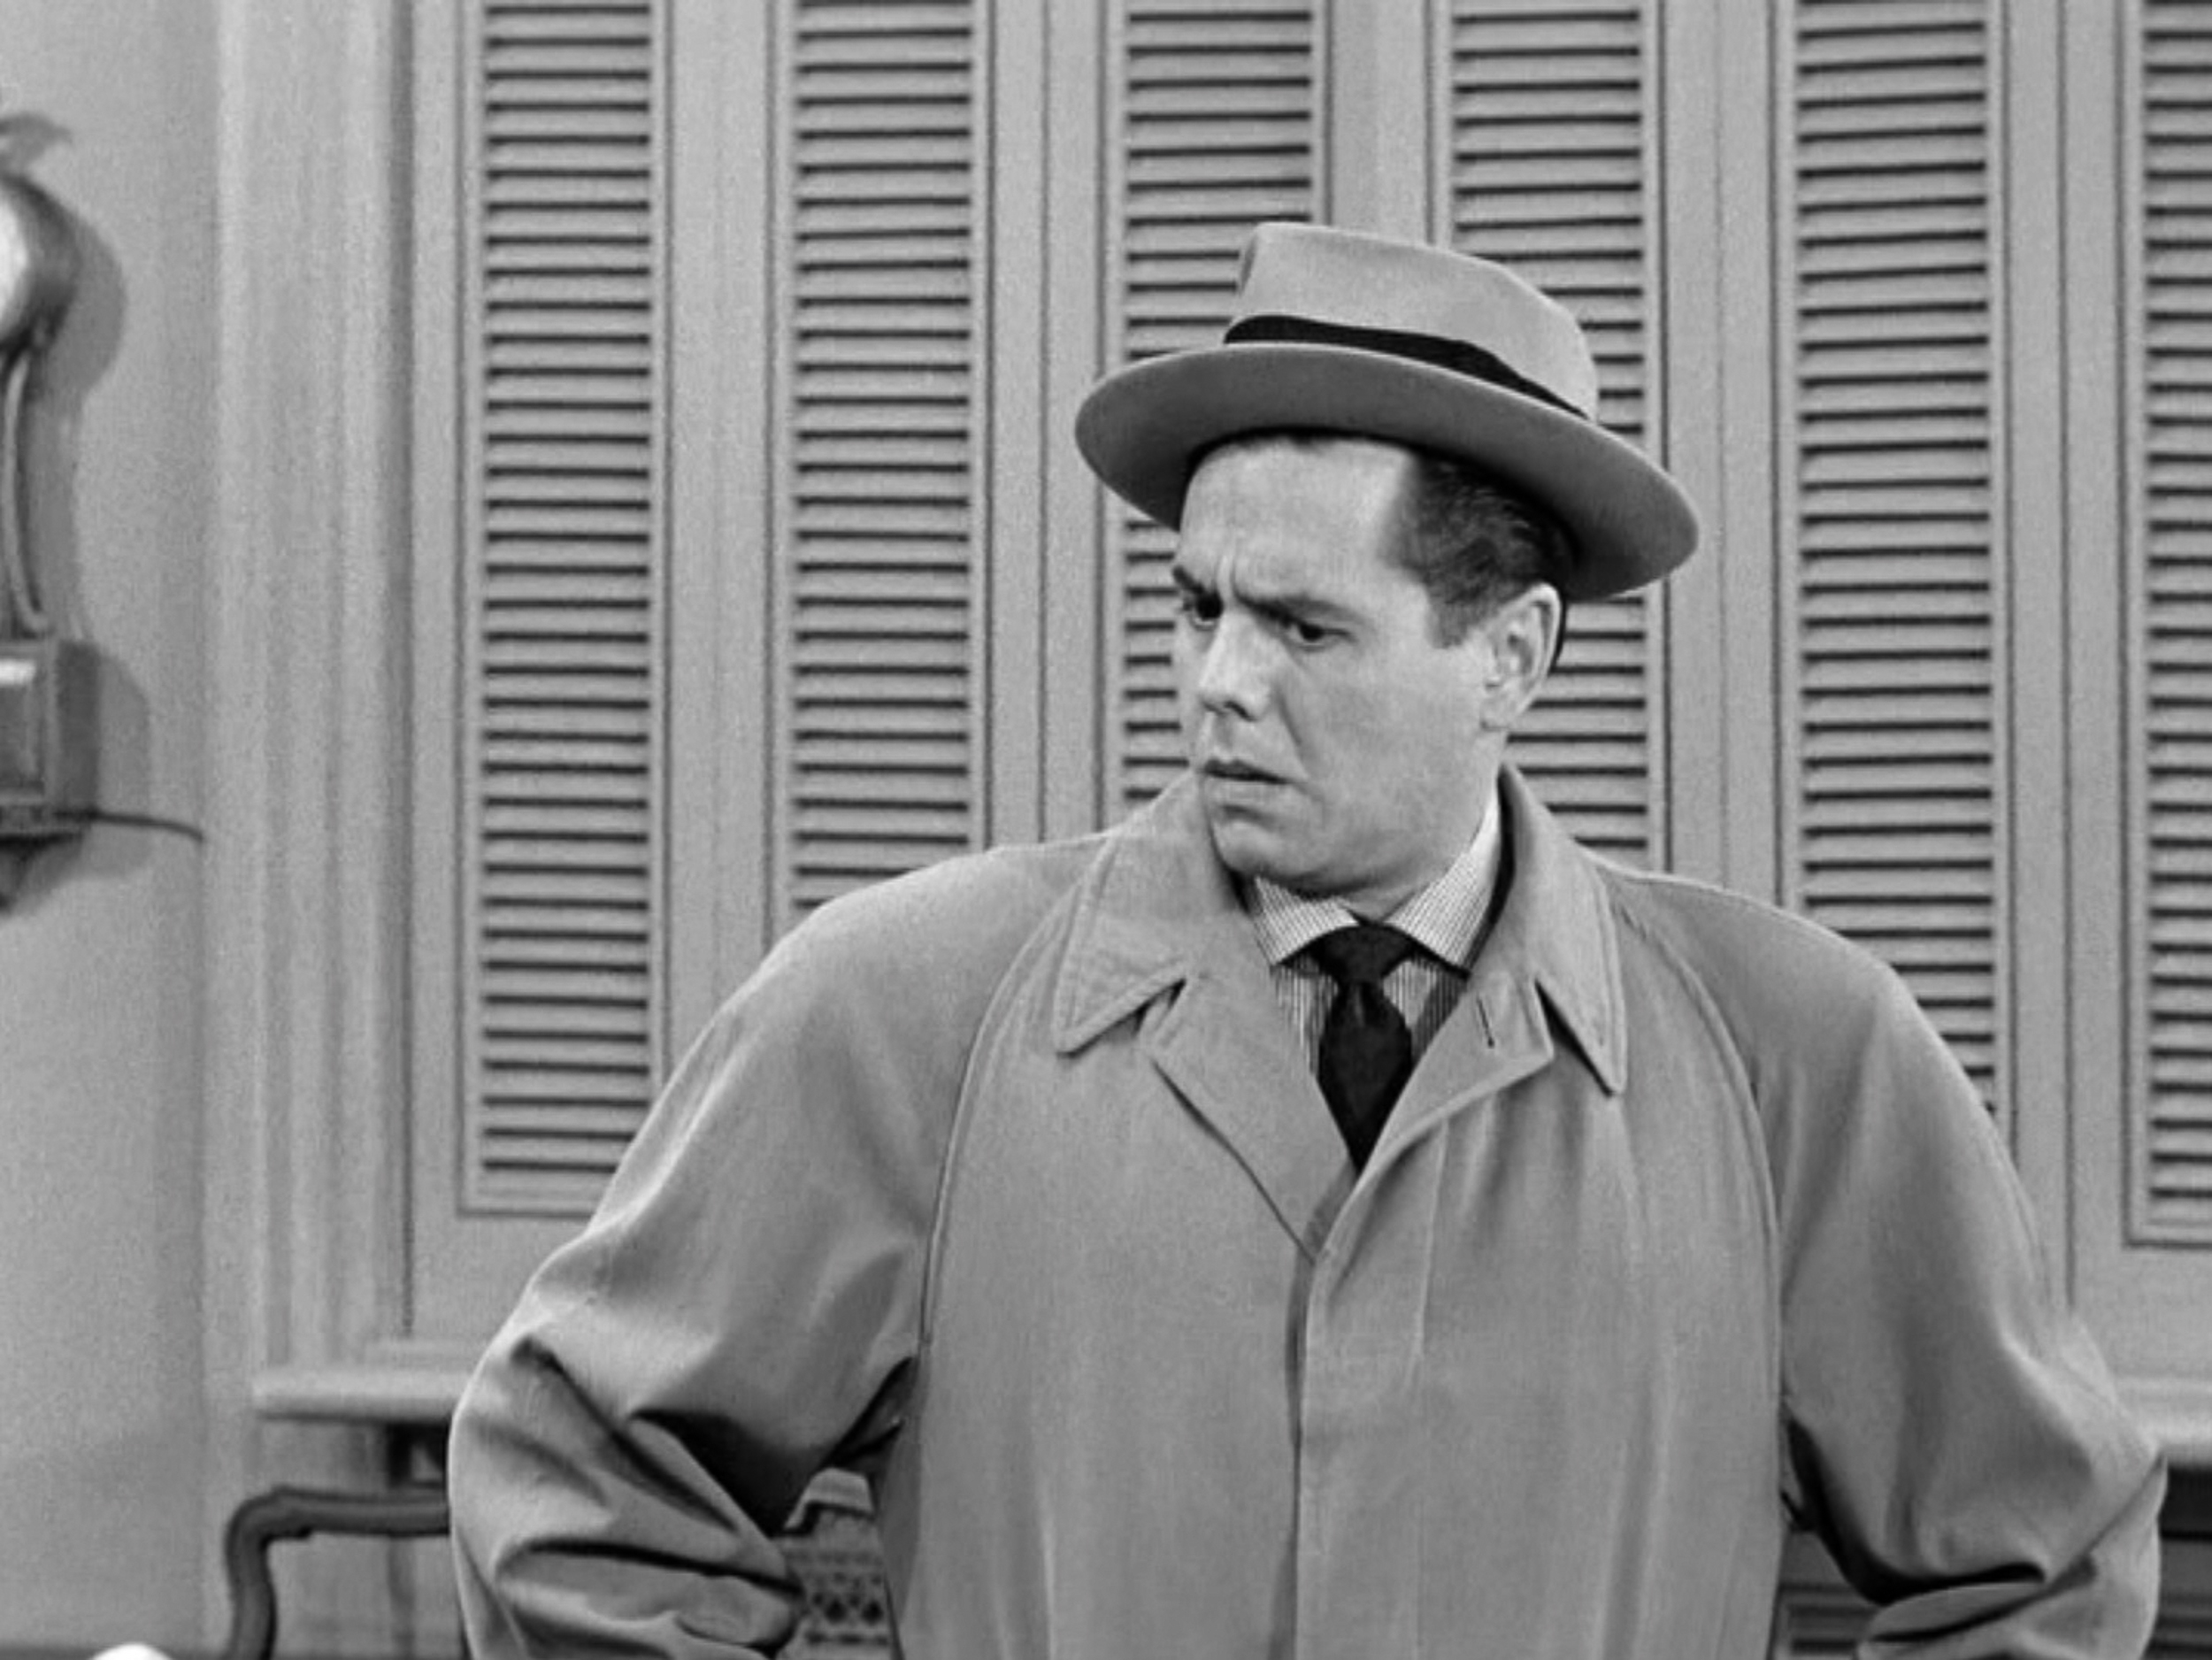 Desi Arnaz Let Frank Sinatra out of His Contract With Desilu Productions for This Career-Making Role